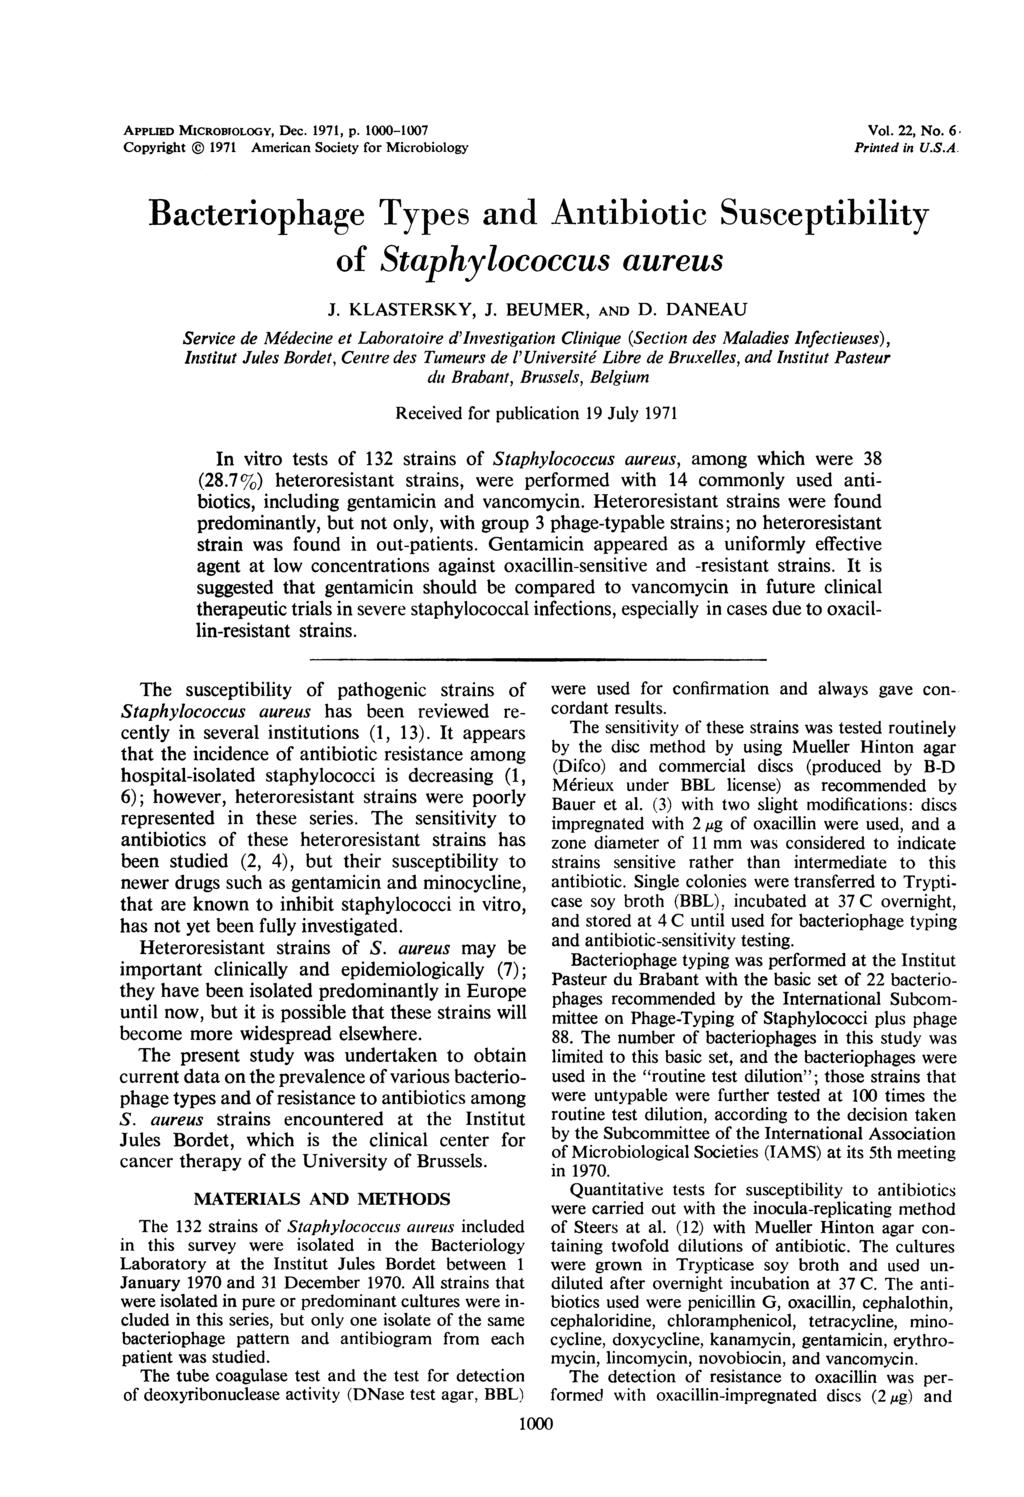 APPLIED MICROBTOLOGY, Dec. 97, p. -7 Copyright ( 97 American Society for Microbiology Vol., No. 6. Printed in U.S.A. Bacteriophage Types and Antibiotic Susceptibility of Staphylococcus aureus J.